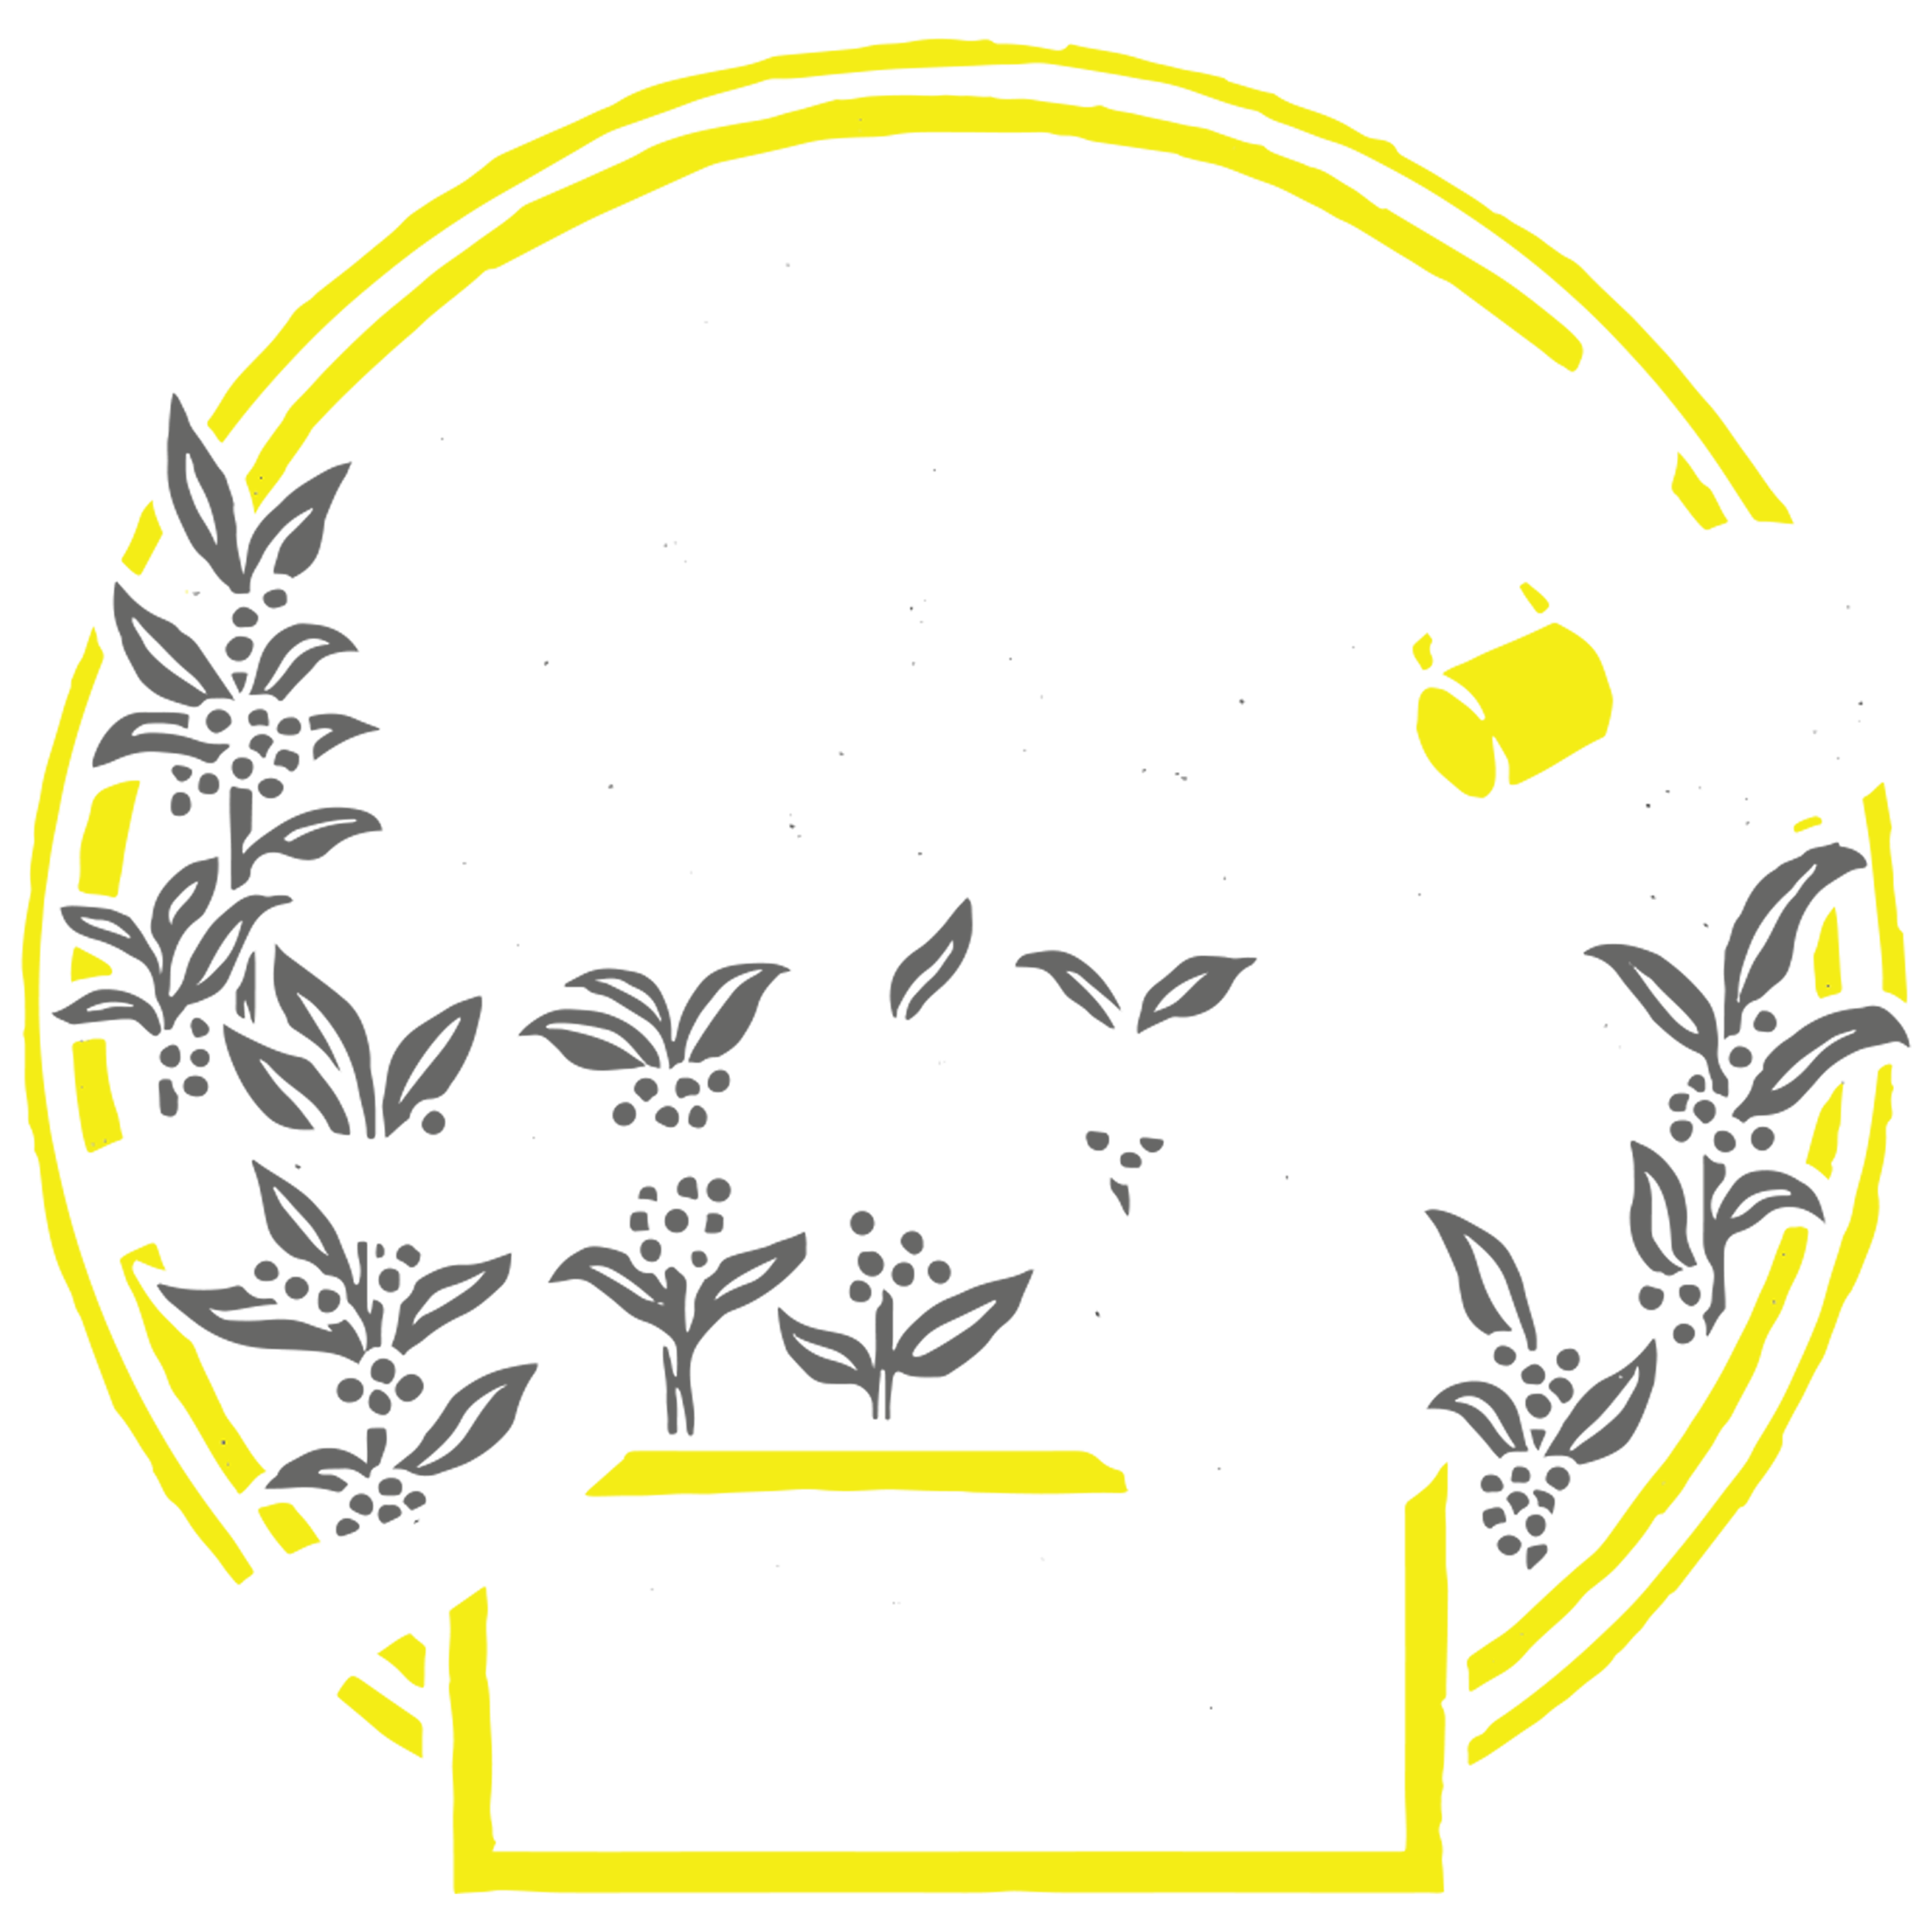 The Bones Coffee Company logo. It has a skeleton sipping from a coffee cup resting on greenery.